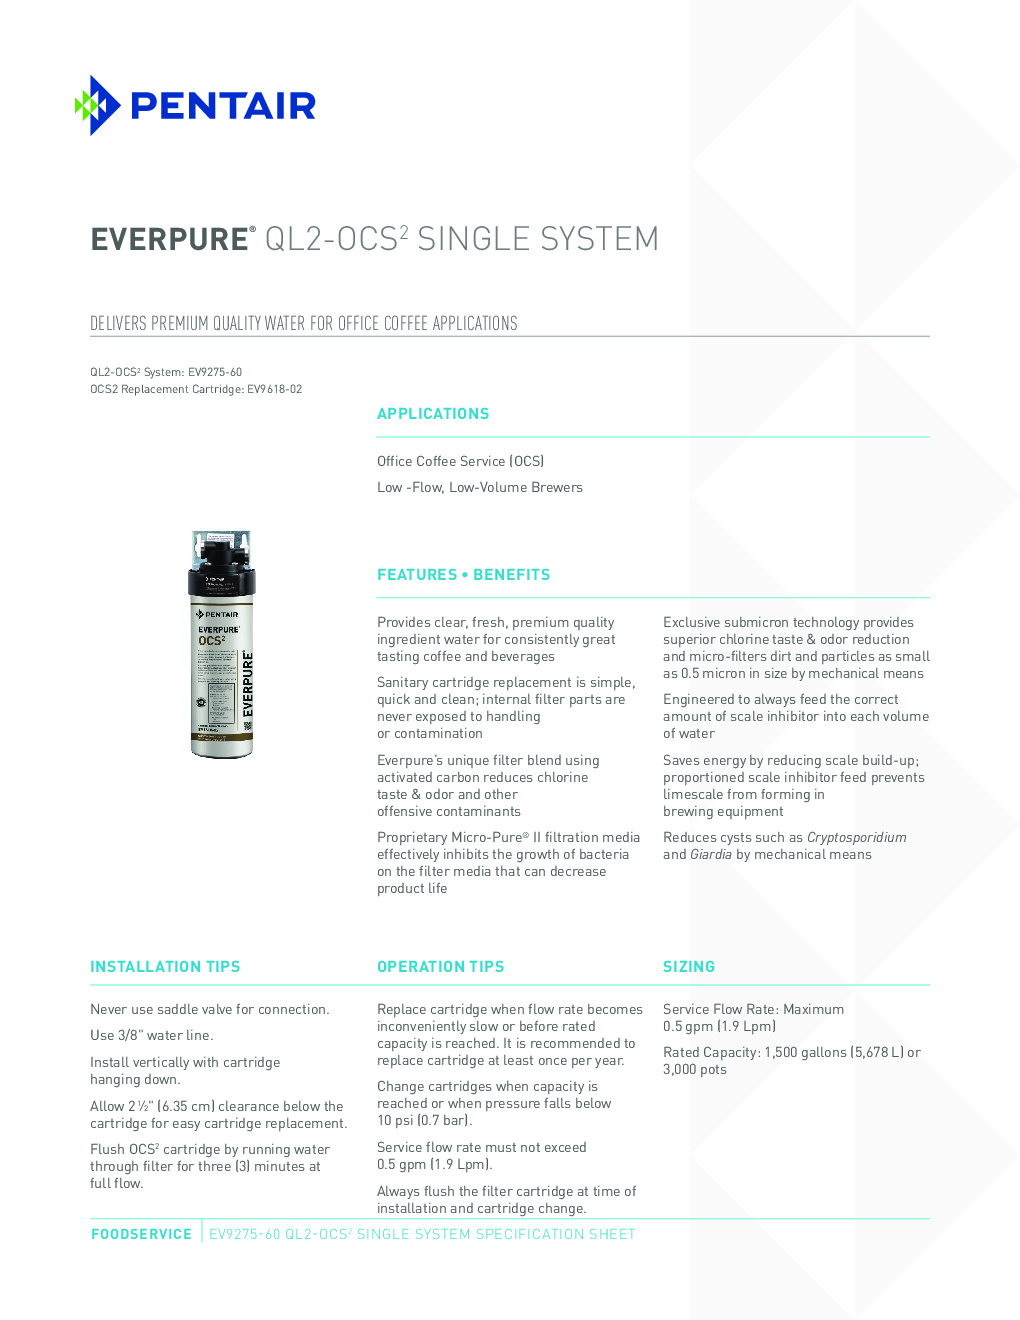 Everpure EV927560 for Coffee Brewers Water Filtration System